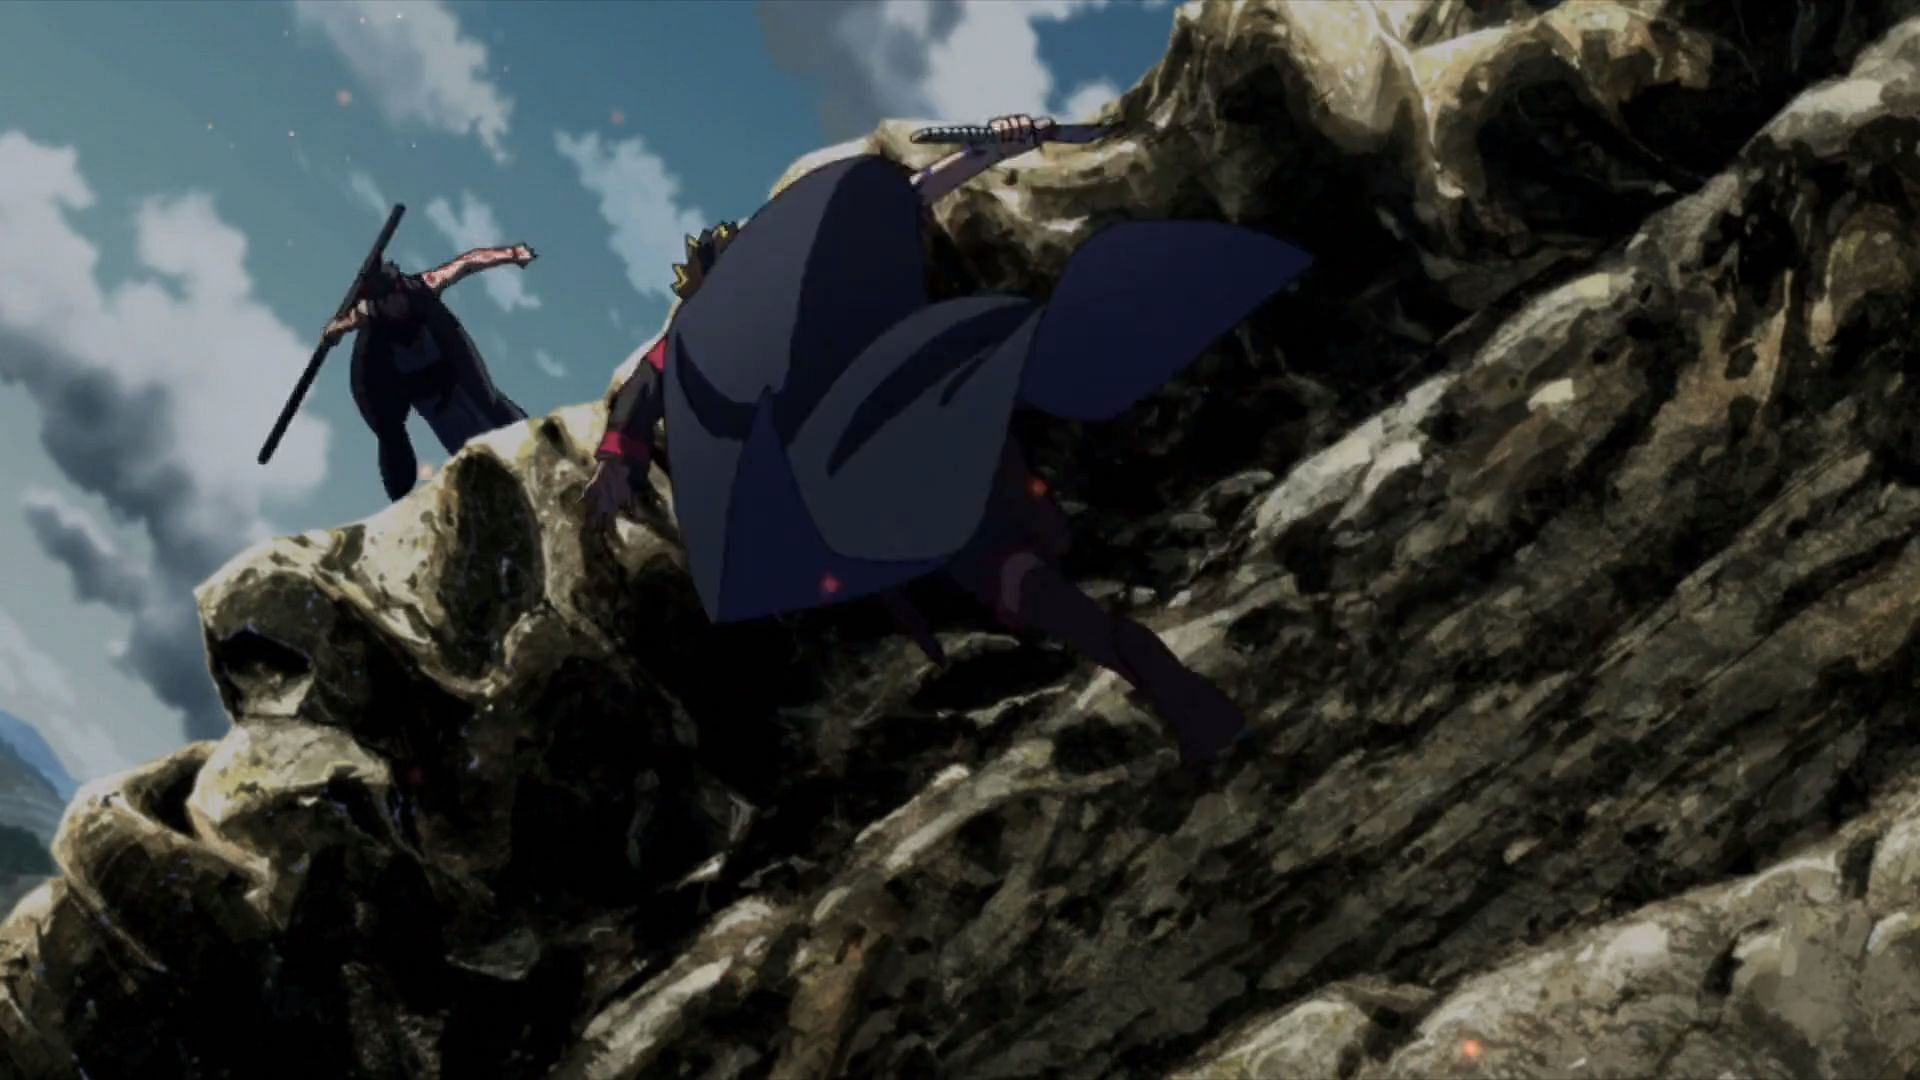 Boruto's Fight With Kawaki is Actually a Battle Between Two Big Villains